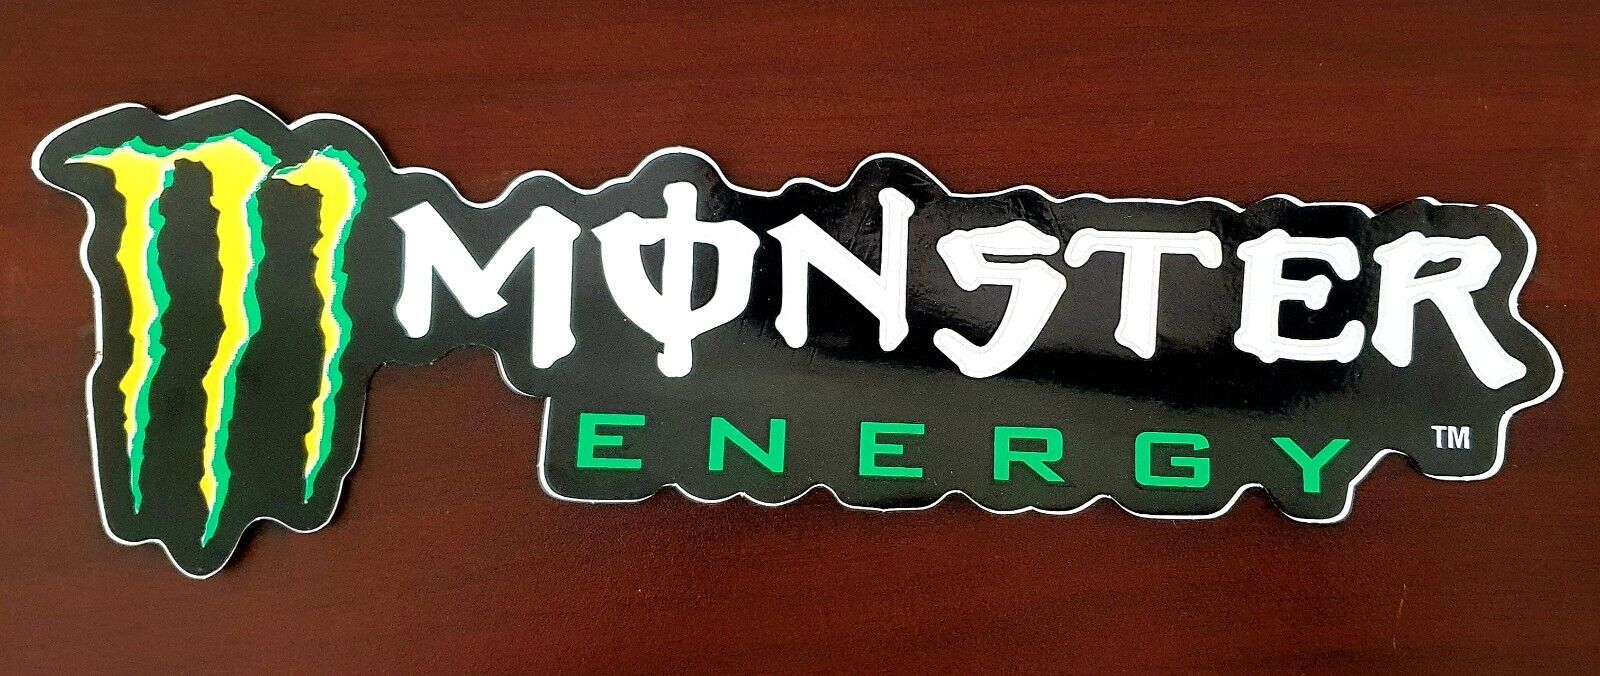 Monster Energy Logo Car Truck Motorcycle Vehicle Decal Decorative Sticker